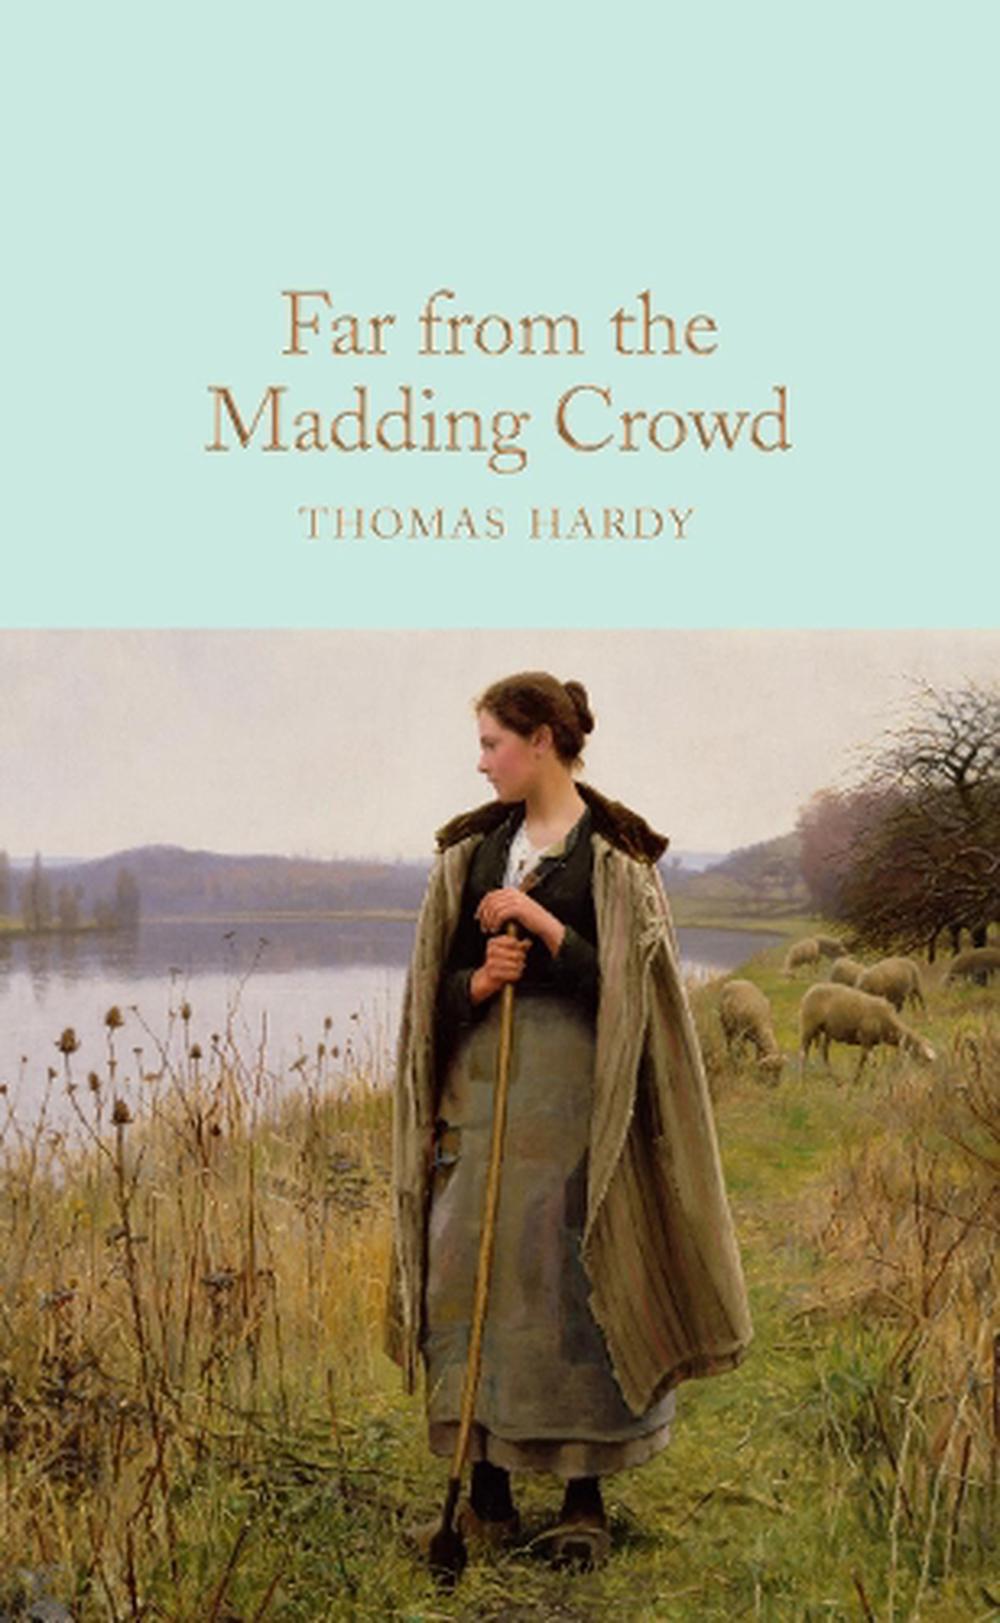 book review far from the madding crowd